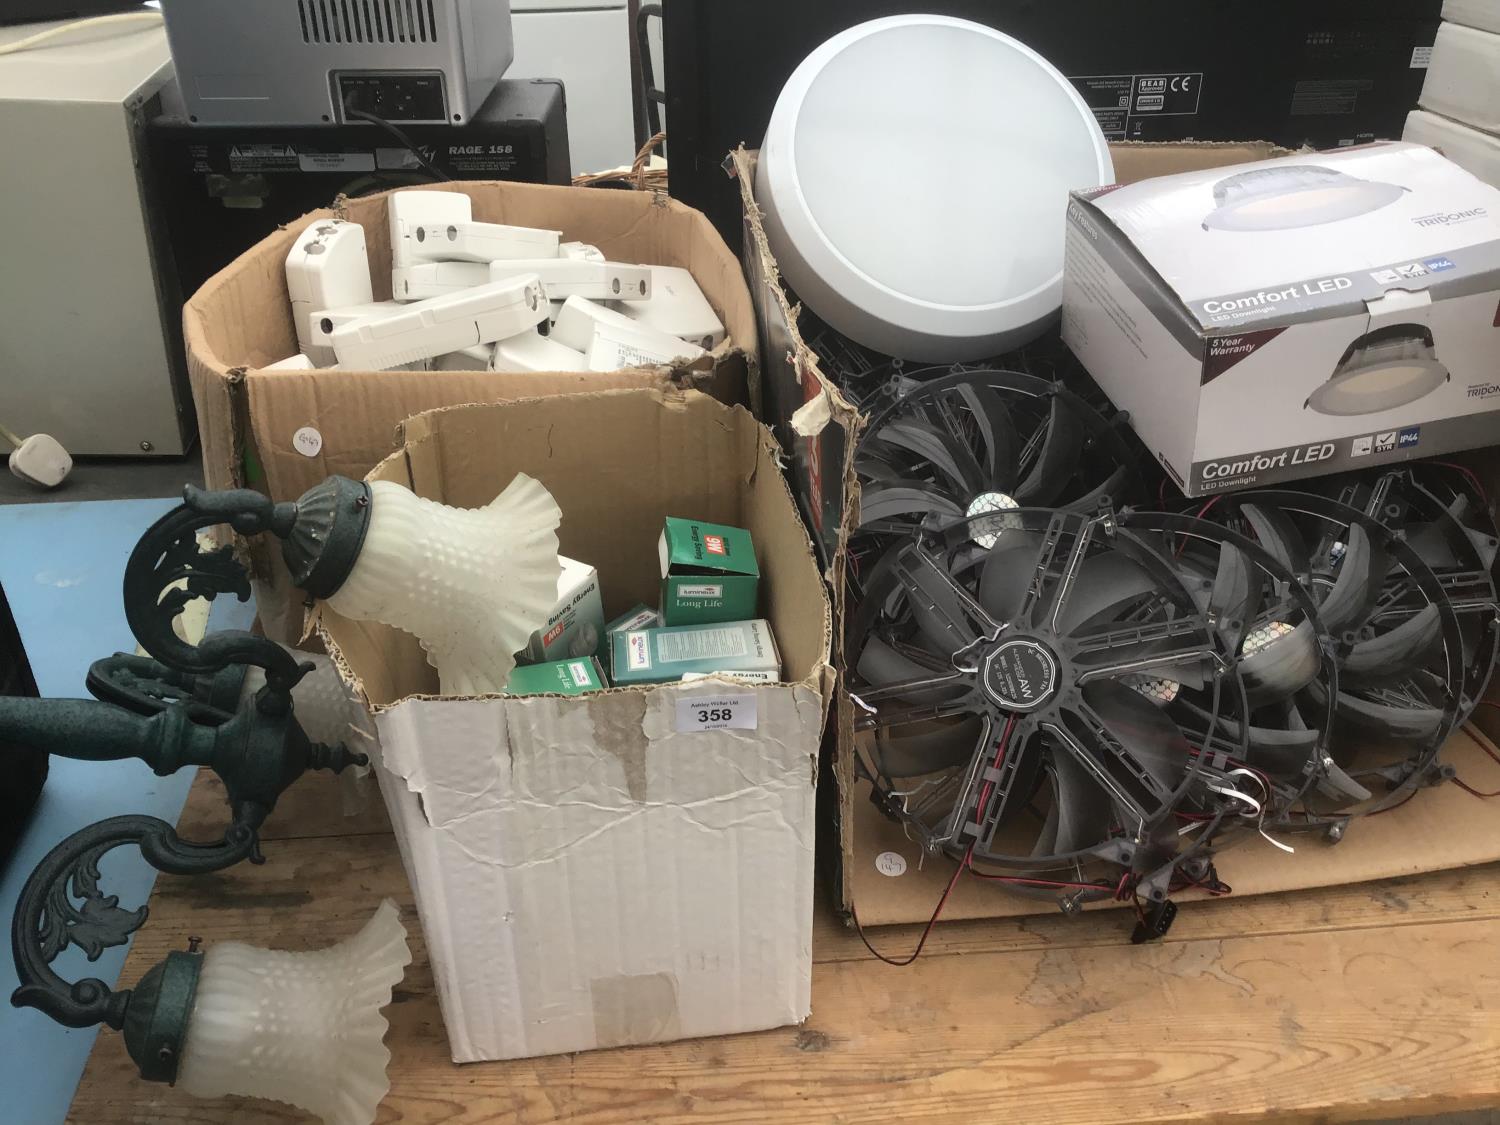 A BOX OF CONSTANT CURRENT LED CONTROL GEAR, A CEILING LIGHT, ENERGY SAVING BULBS, FANS ETC